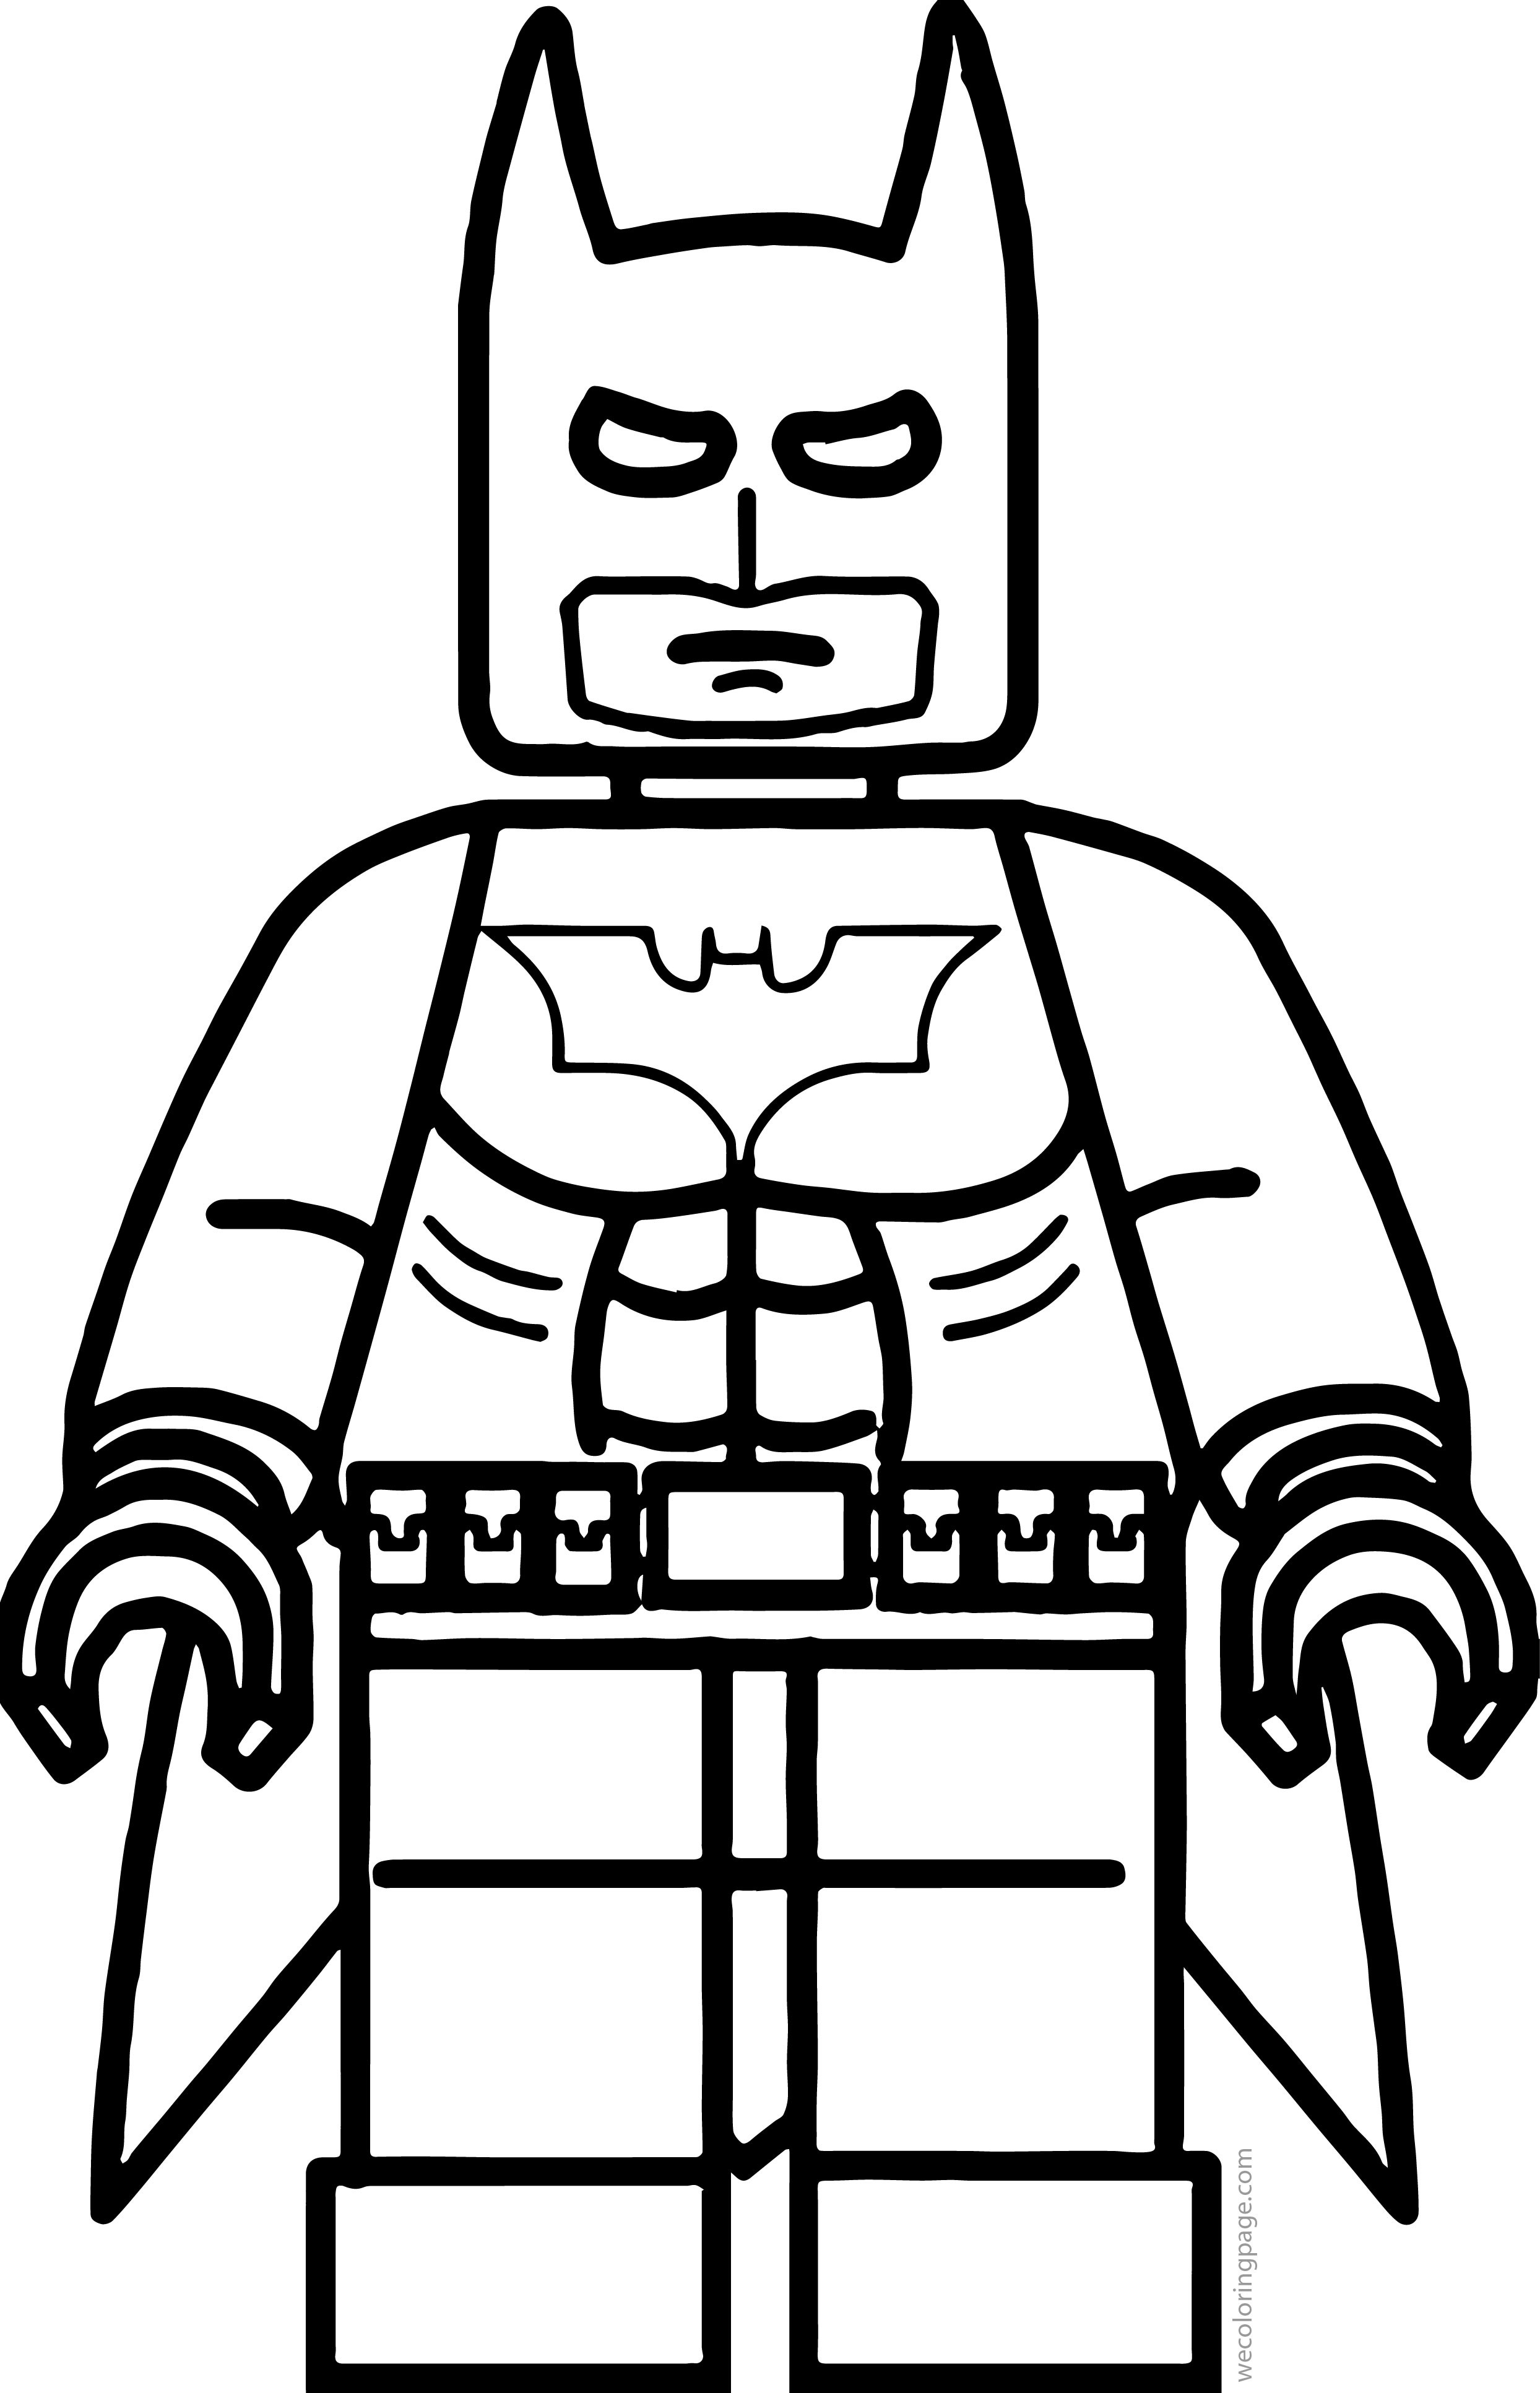 Batman And Spiderman Coloring Pages at GetDrawings | Free ...